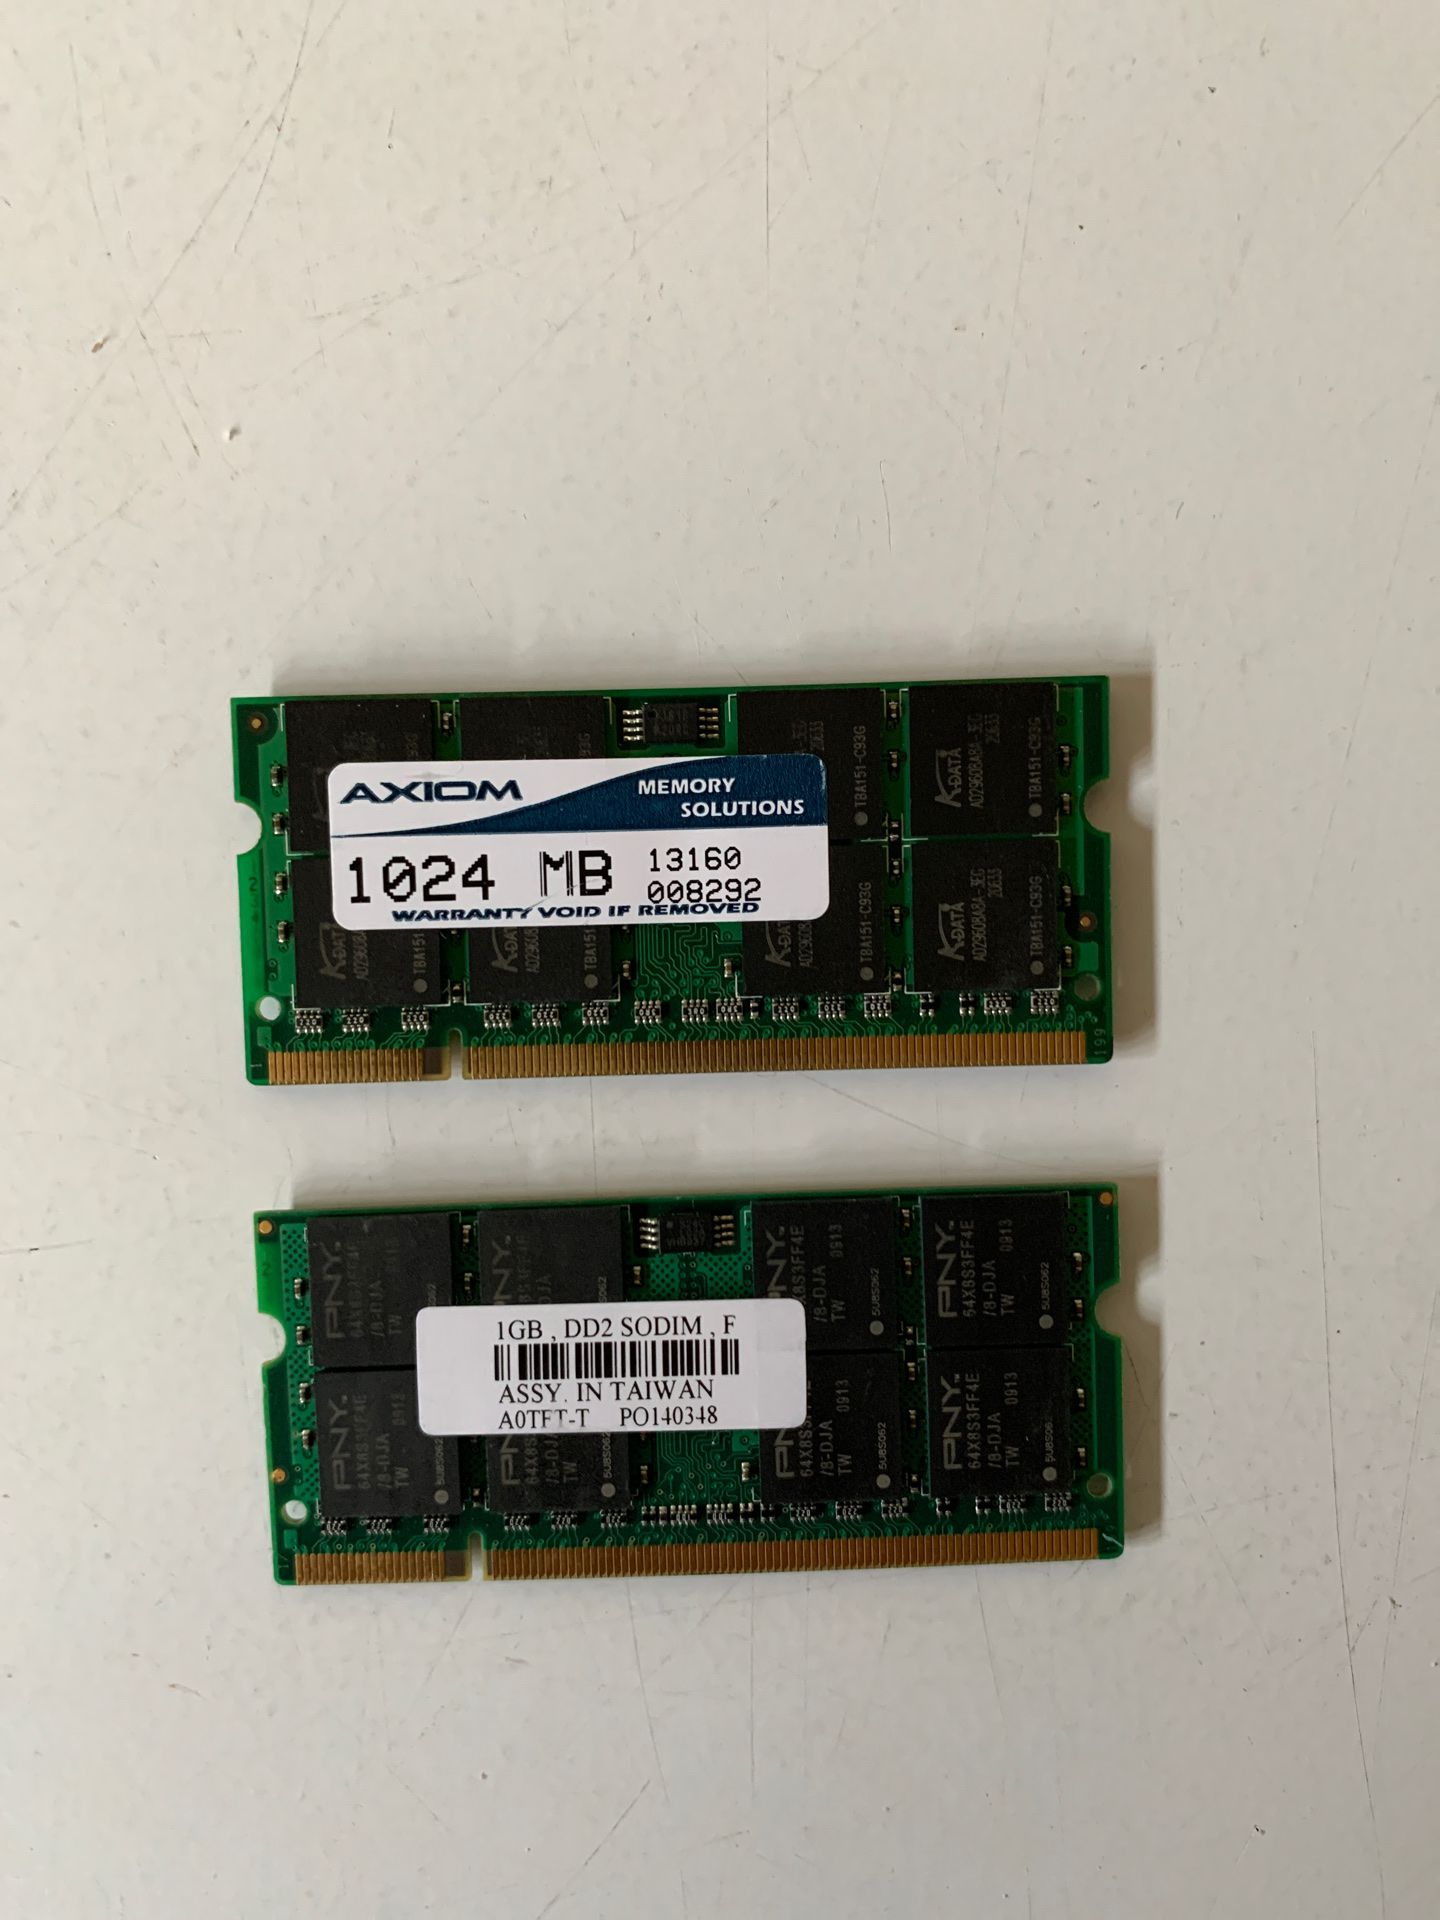 2 GB PC2 Laptop Memory Card- Used/ Working